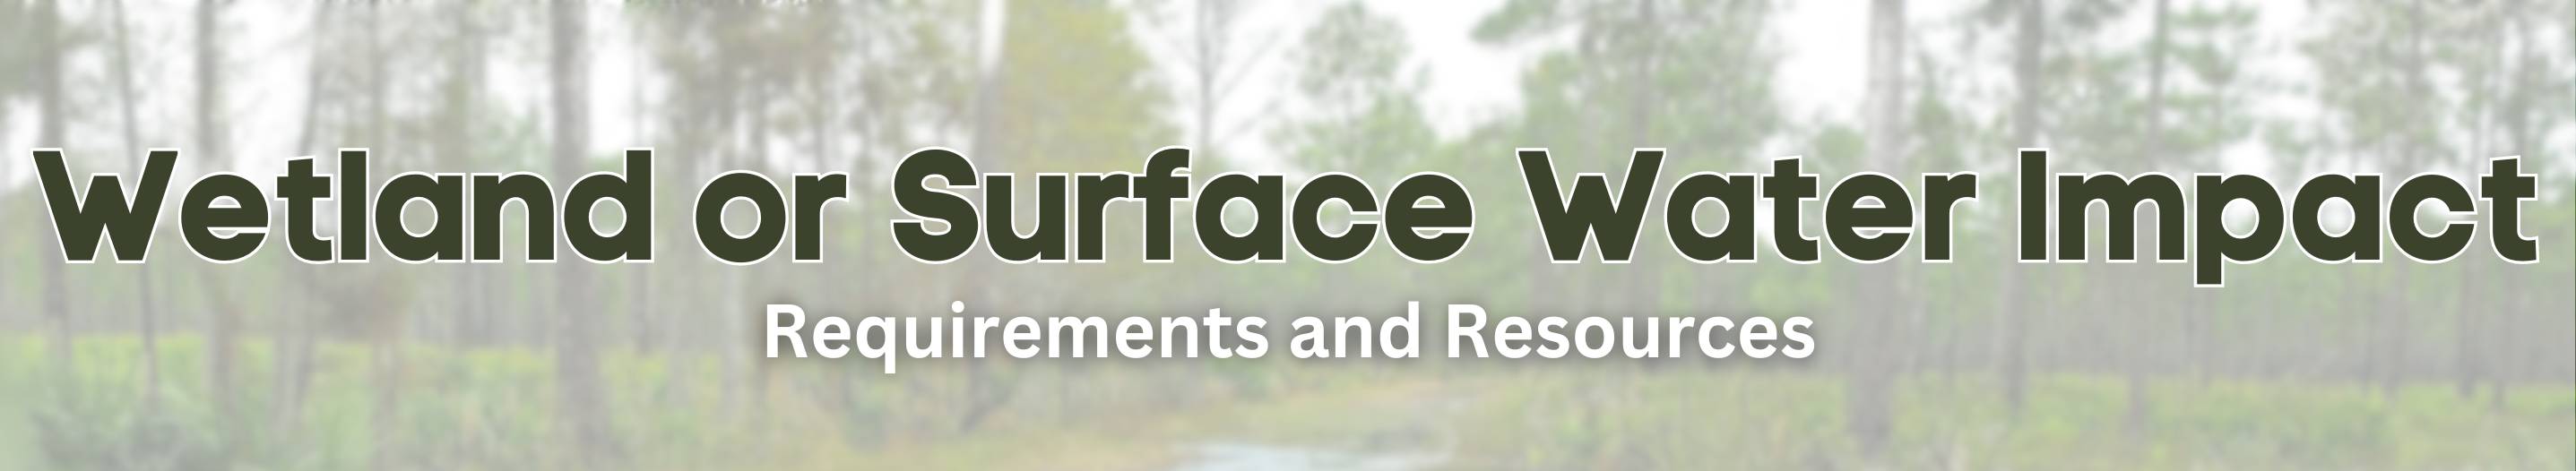 Wetland or Surface Water Impact - Requirements and Resources